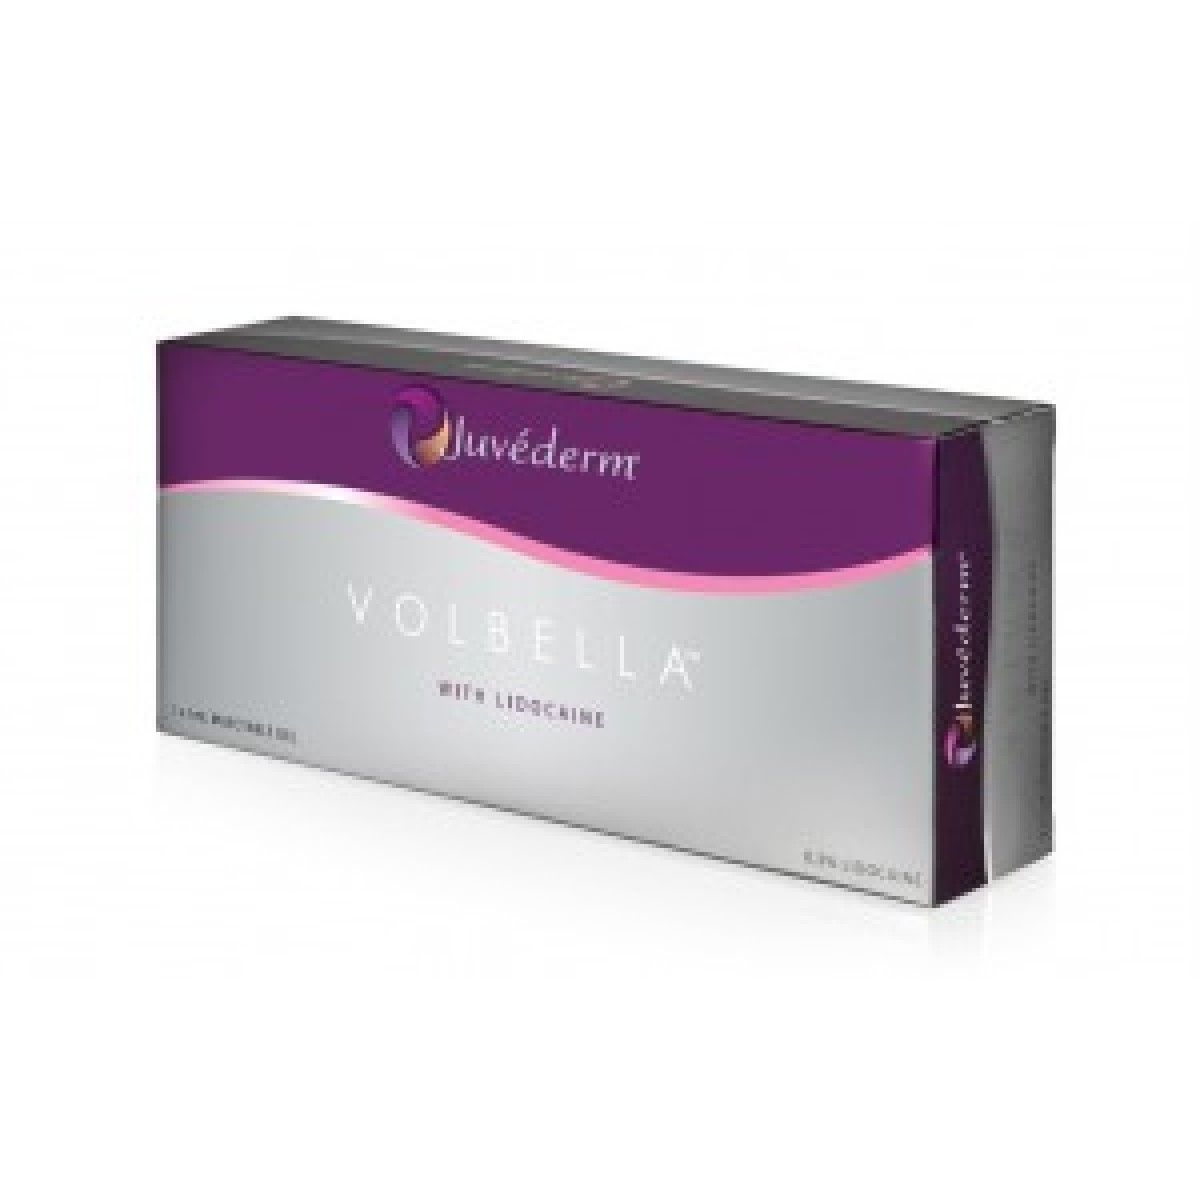 Image of Juvederm Volbella With Lidocaine 2 Siringhe x1ml 924740879